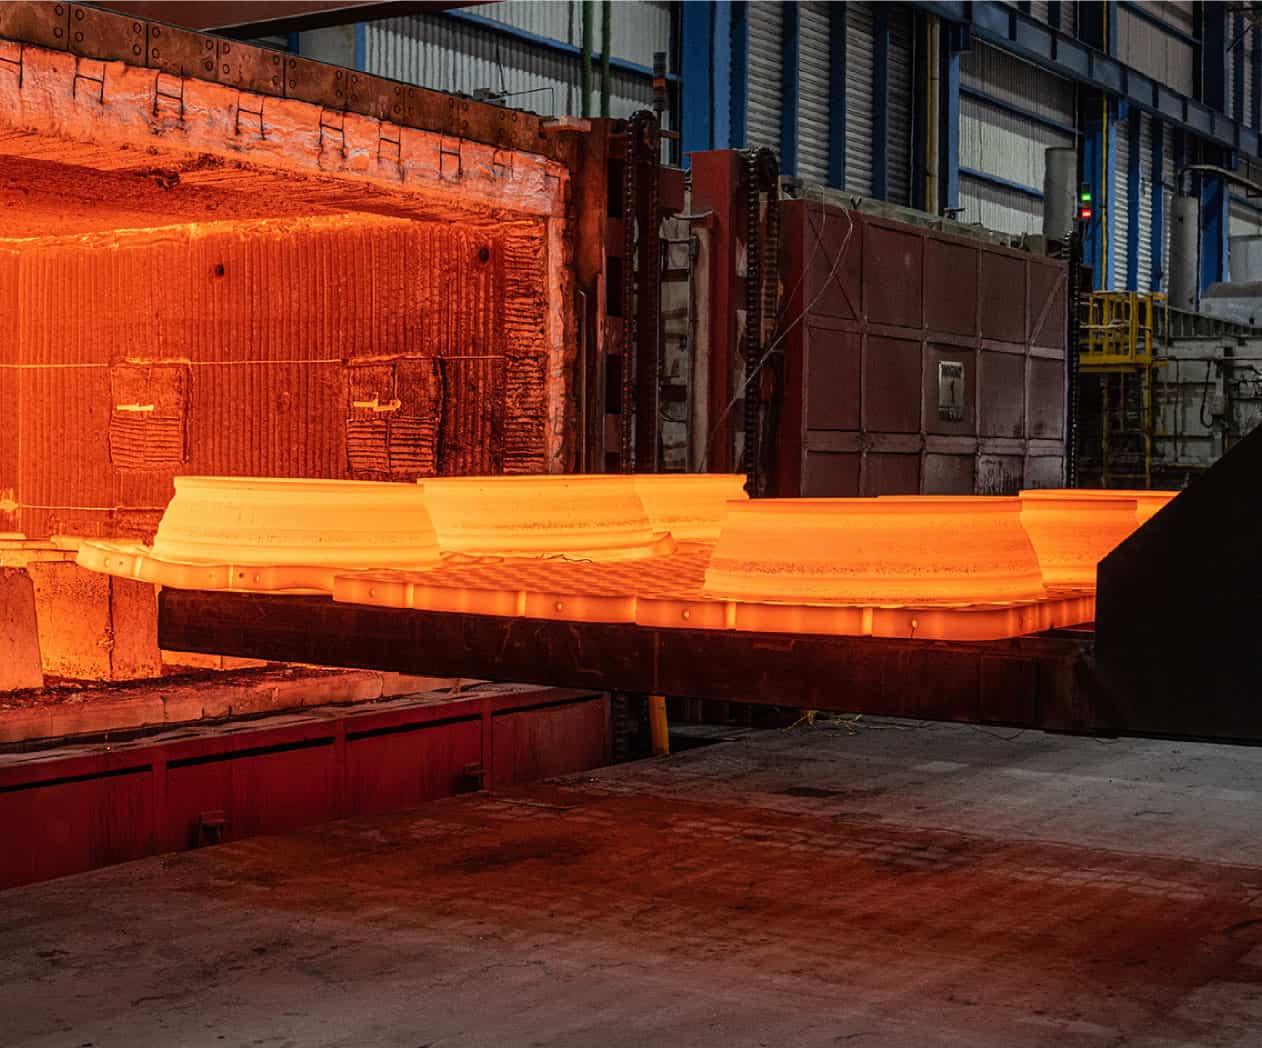 Glowing hot metal sheets being processed in an industrial furnace at a steel mill.